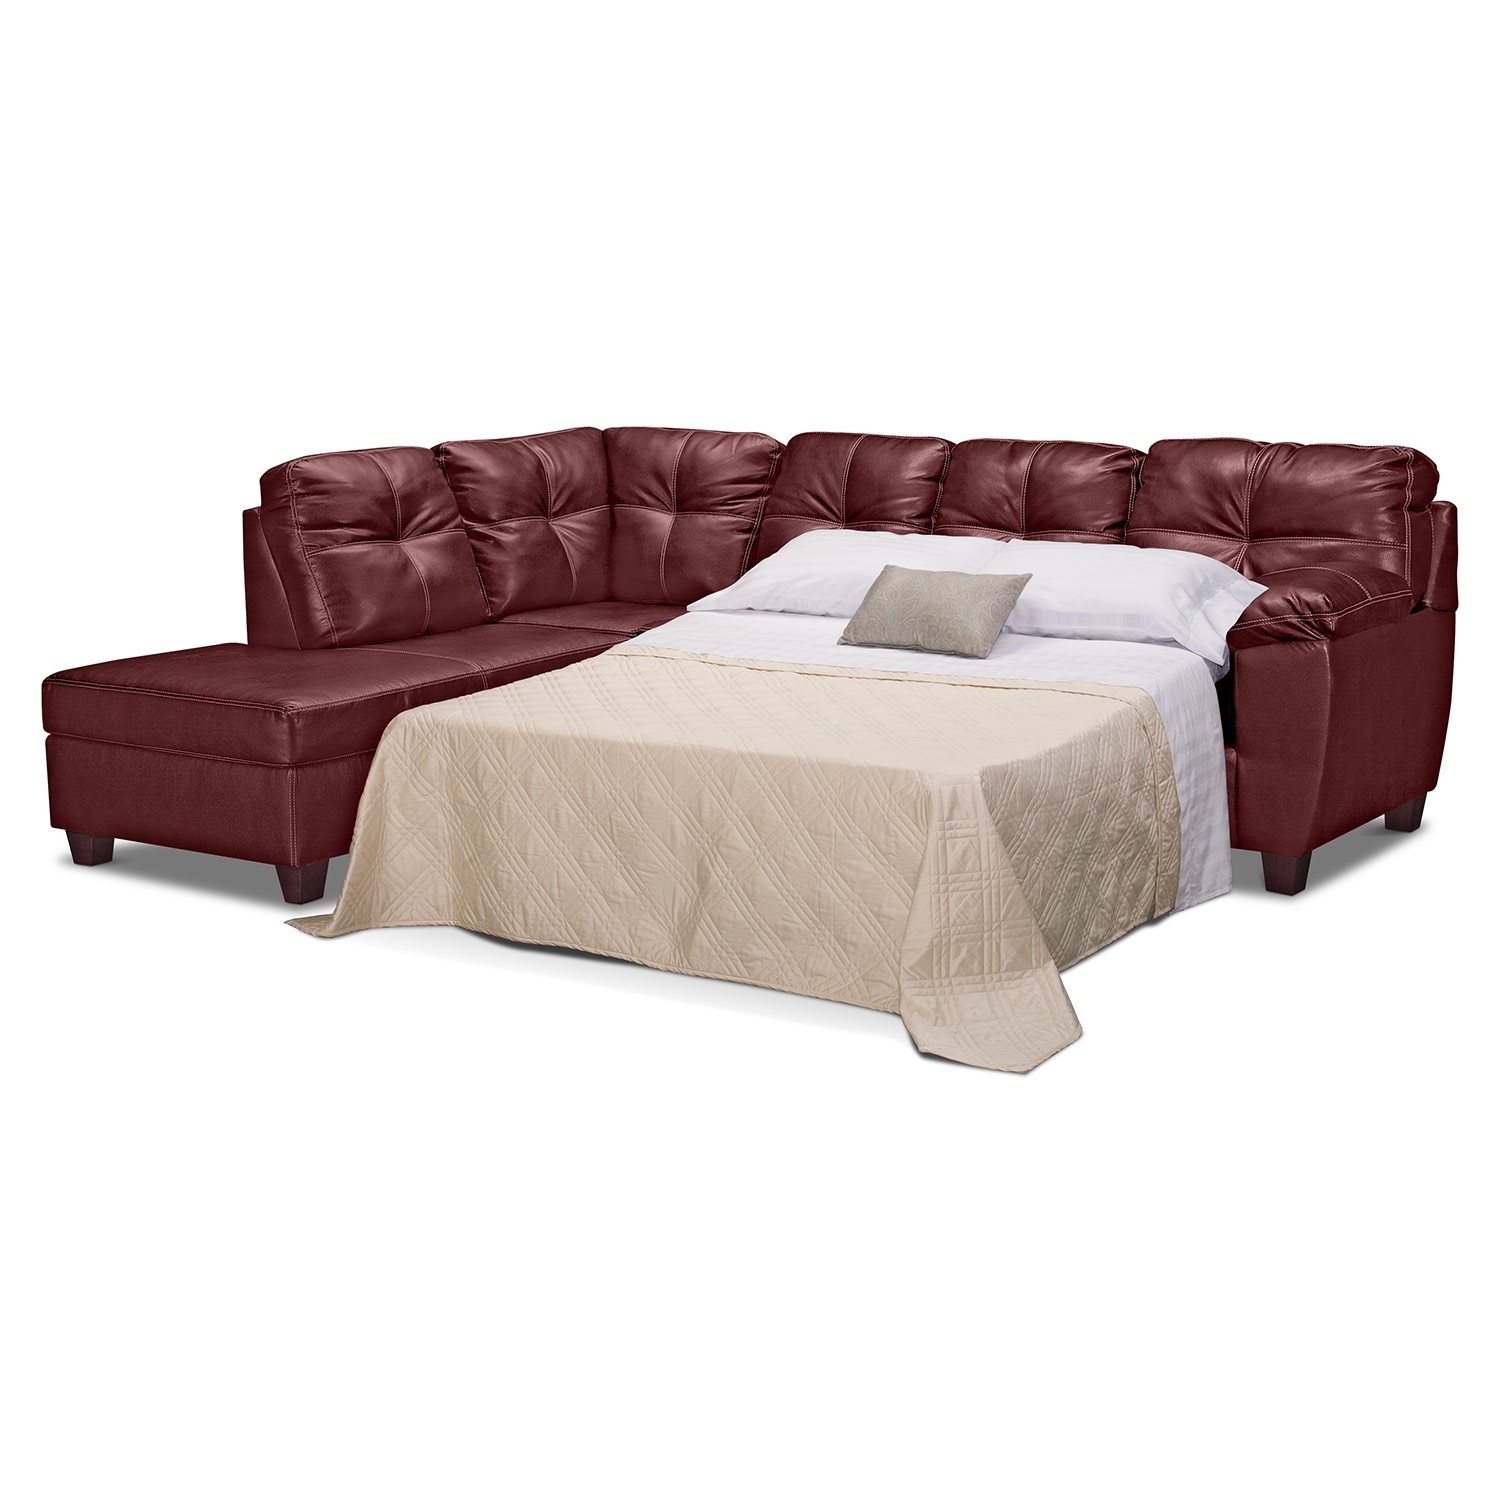 Sleeper sofa sectionals leather leather sectional sleeper